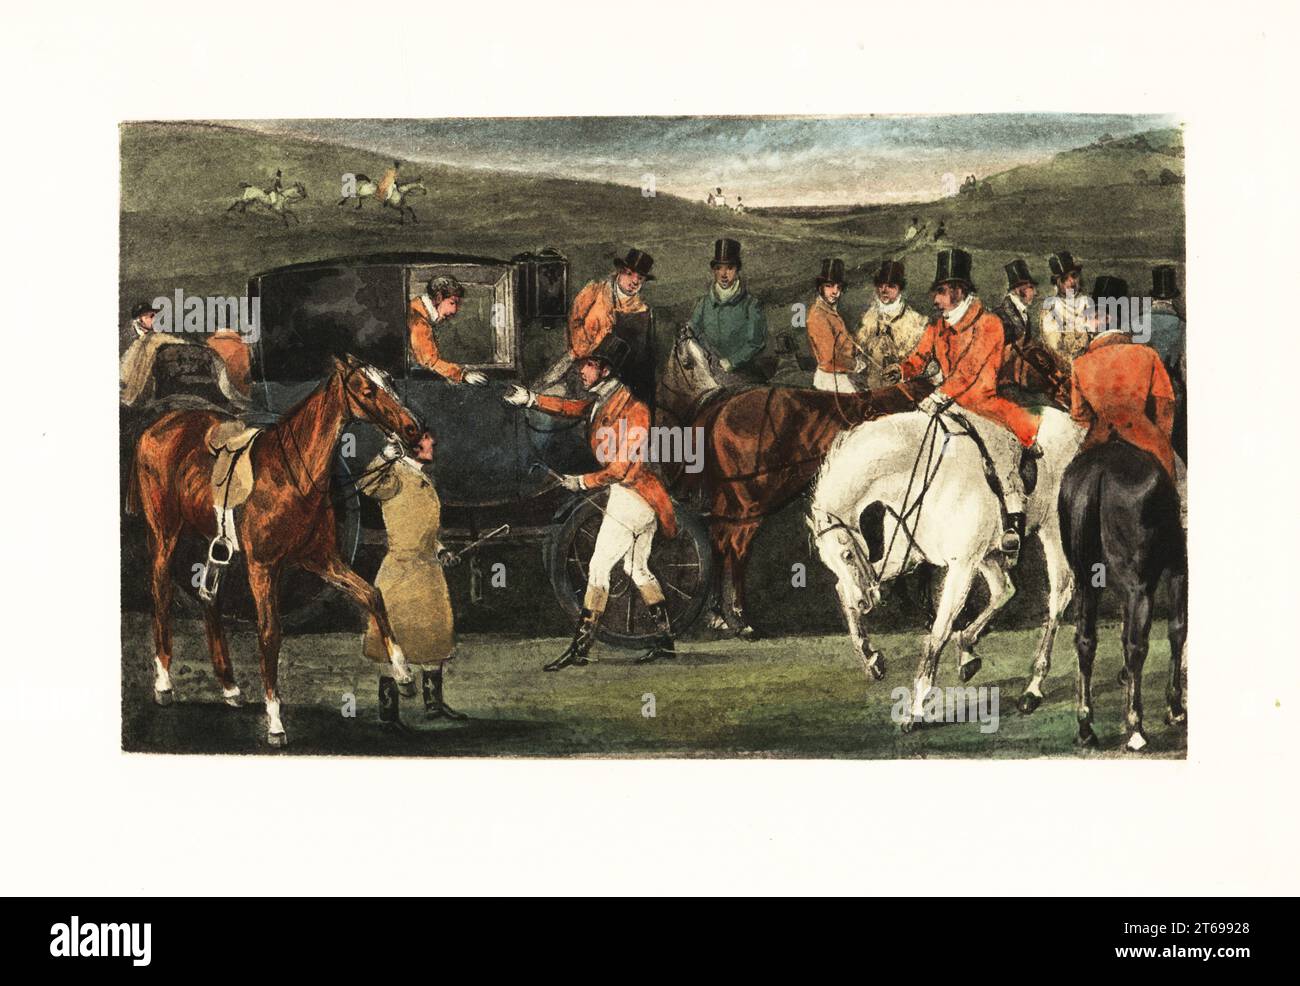 Victorian gentlemen on horseback gathering for a stag hunt. Men in pinks and top hats wait for the hunt to start, while Lord Stanley greets Mytton in his coach.The Meet with Lord Derbys staghounds. Chromolithographic facsimile of an illustration by Henry Thomas Alken from Memoirs of the Life of the Late John Mytton by Nimrod aka Charles James Apperley, Kegan Paul, London, 1900. Stock Photo